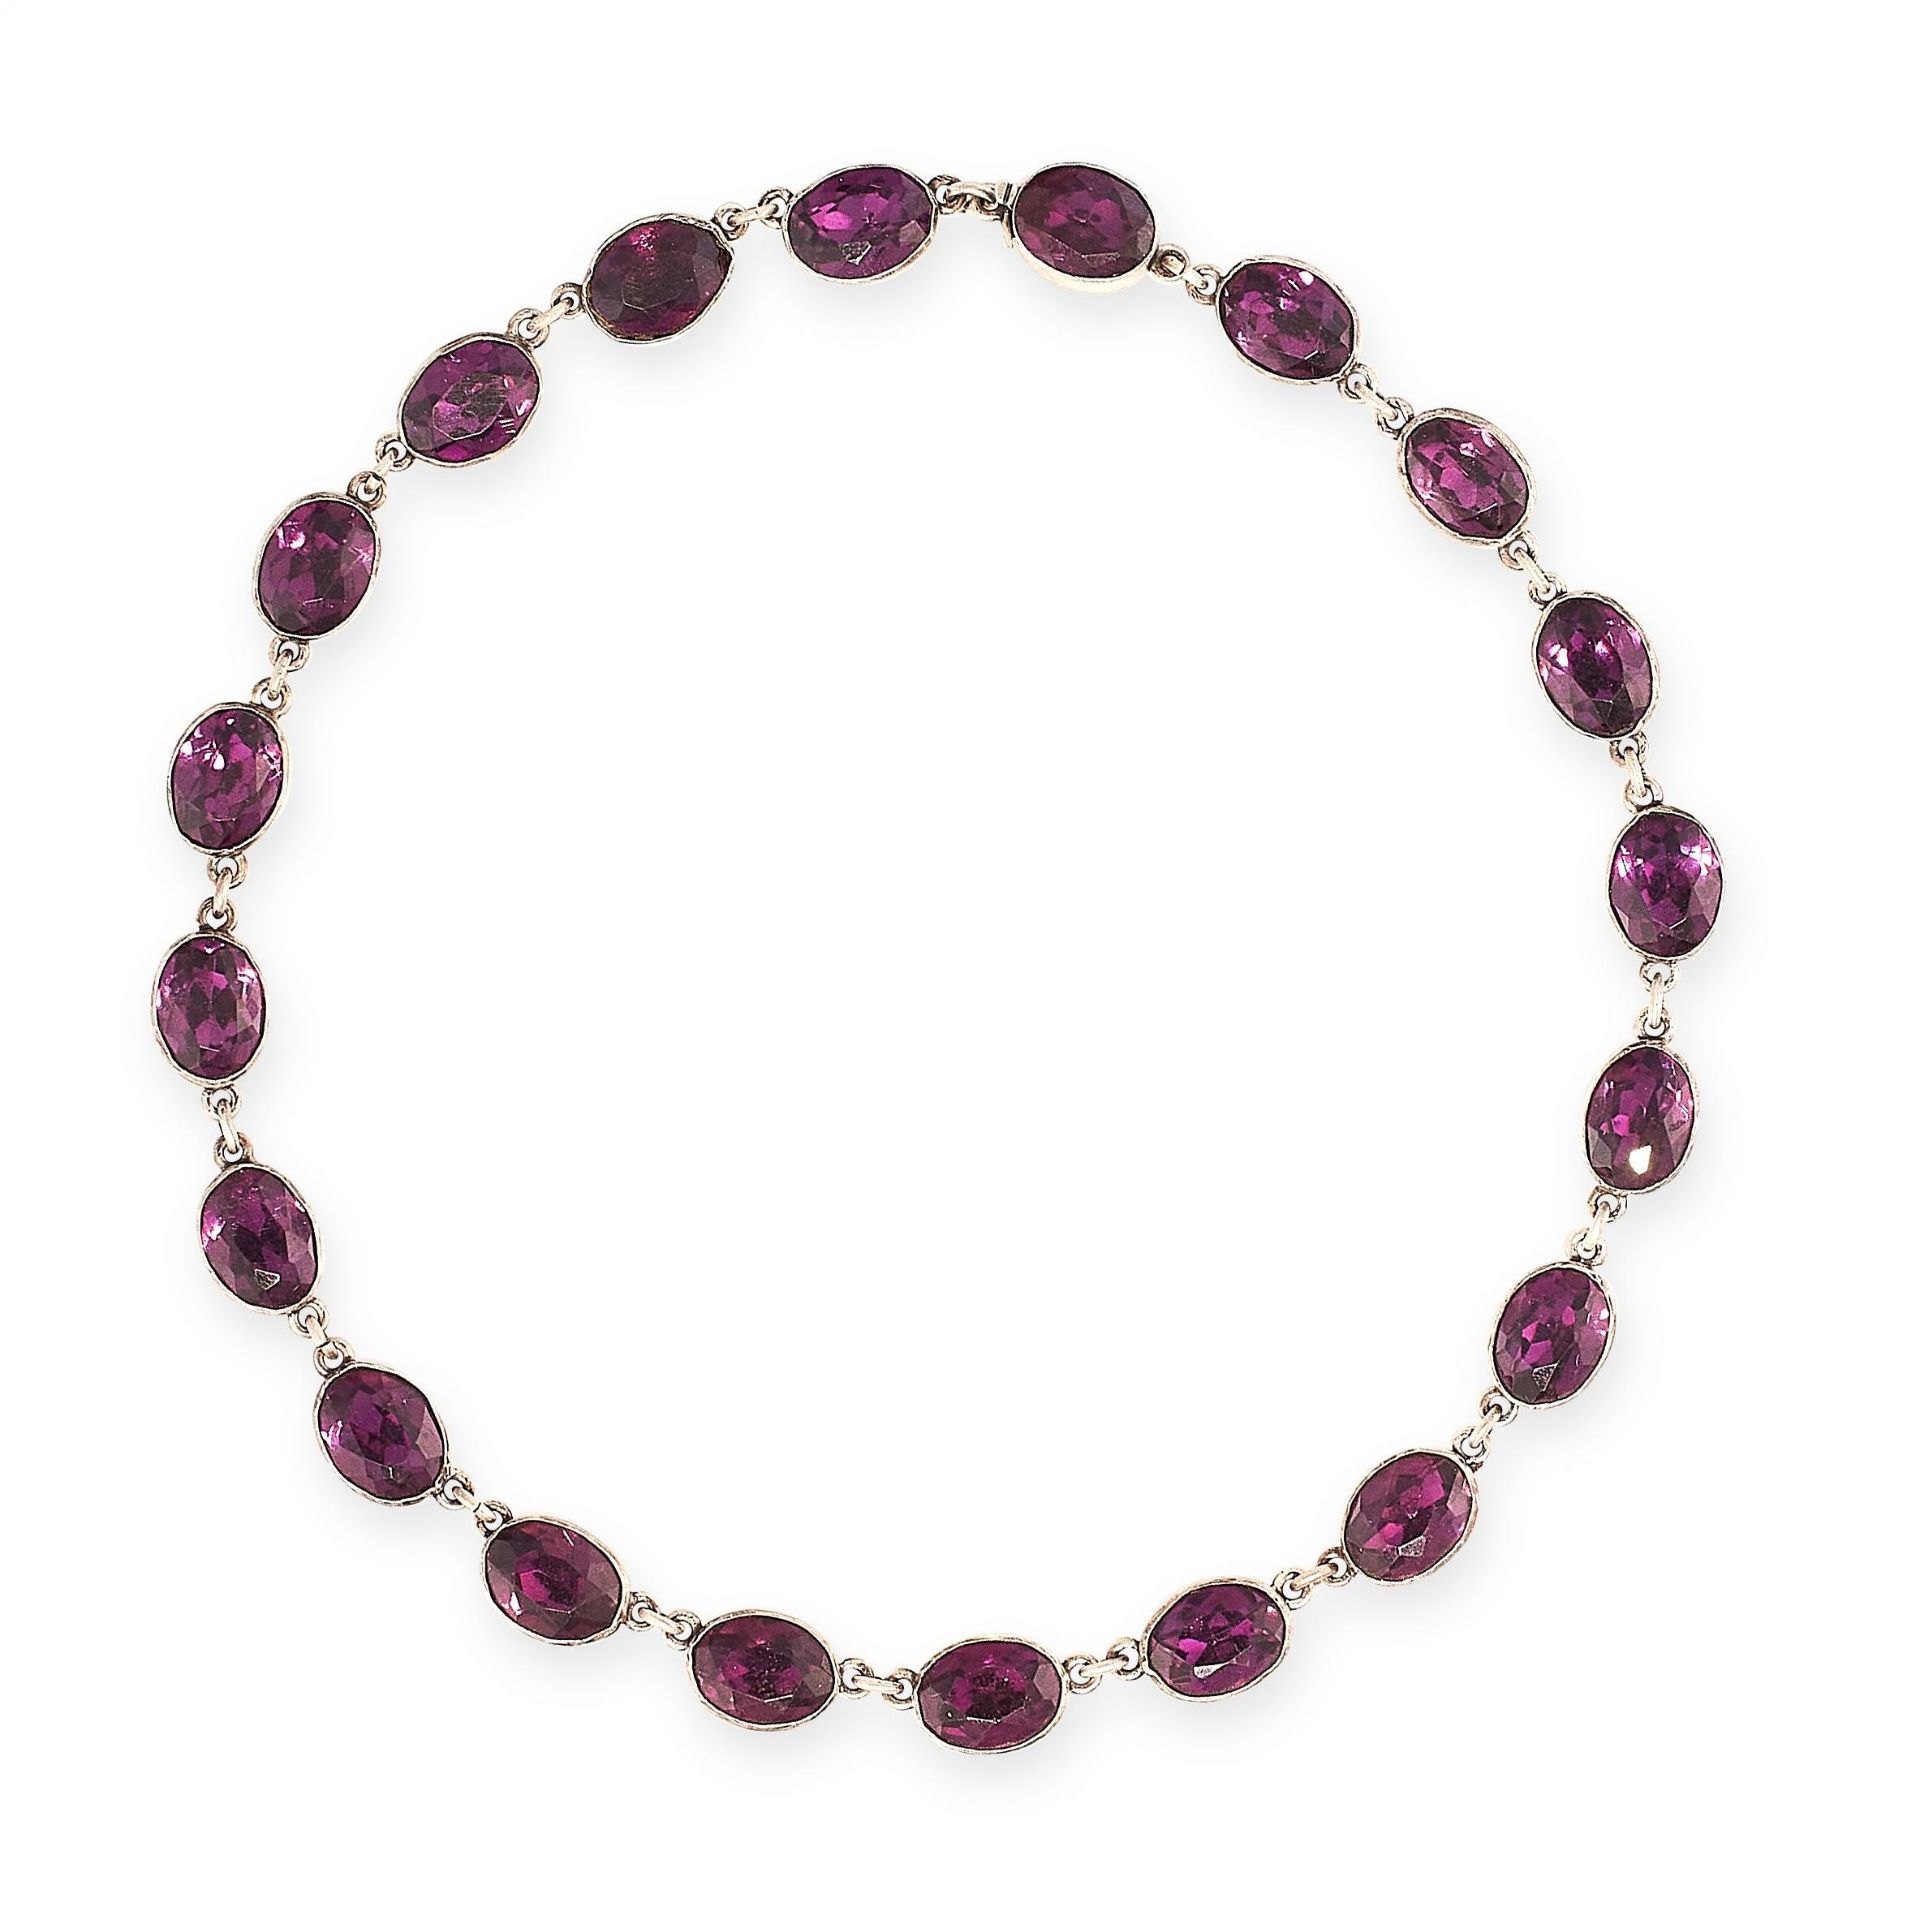 ANTIQUE PASTE AMETHYST RIVIERE NECKLACE in silver, comprising a single row of twenty oval cut purple